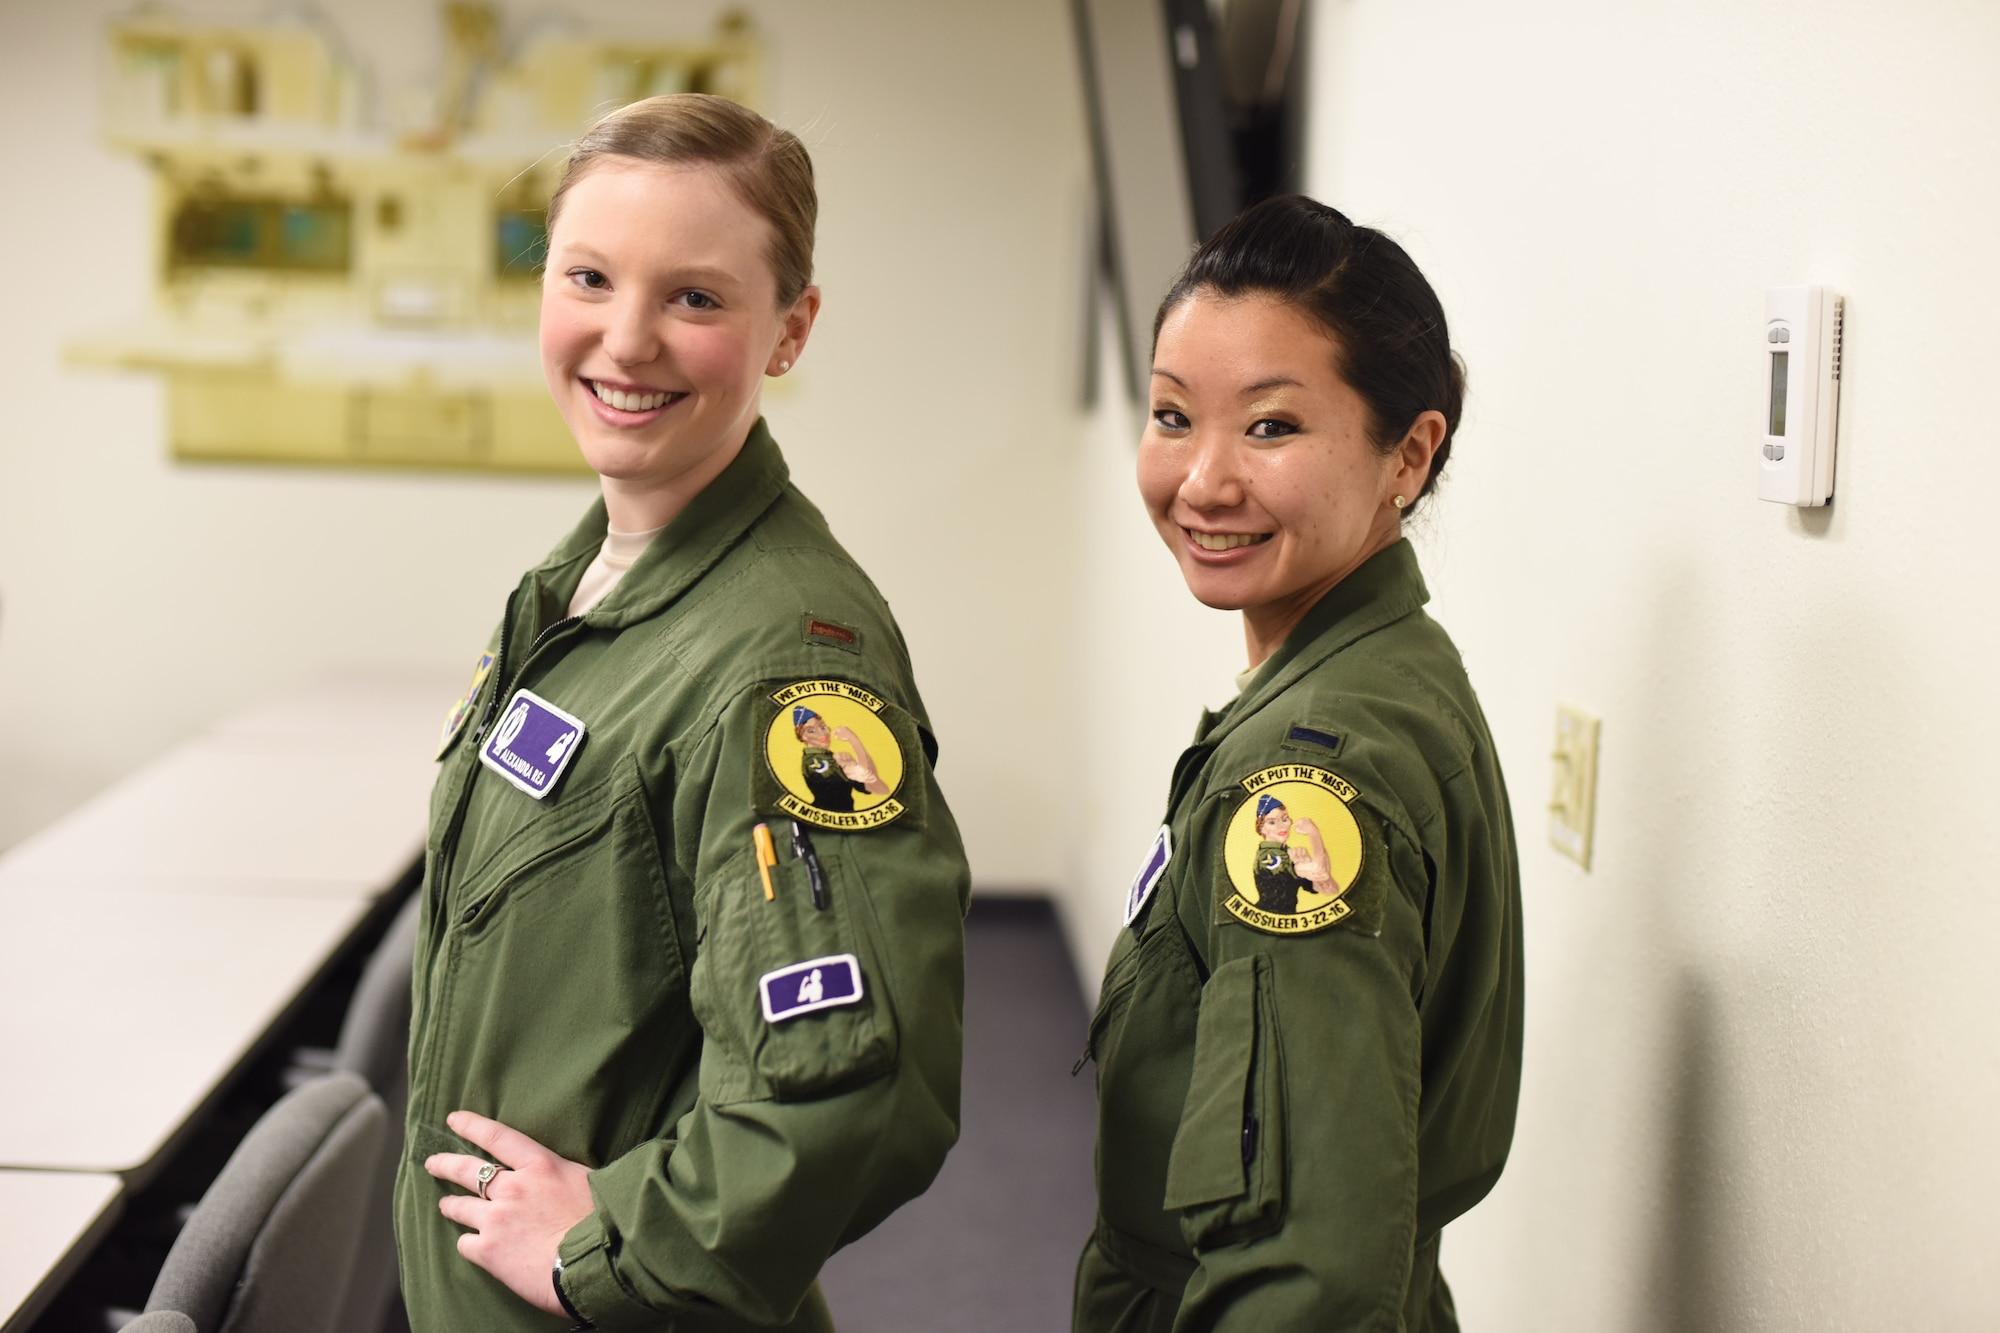 2nd Lt. Alexandra Rea, 490th Missile Squadron ICBM combat crew deputy director, left, and 1st Lt. Elizabeth Guidara, 12th Missile Squadron combat crew deputy director, pose for a photograph after a training session at the Building 500 Missile Procedures Trainer March, 21, 2016. During their assignment, the missileers will maintain a 24-hour alert shift to sustain an active alert status of our nation’s intercontinental ballistic missile force. (U.S. Air Force photo/Airman Collin Schmidt)